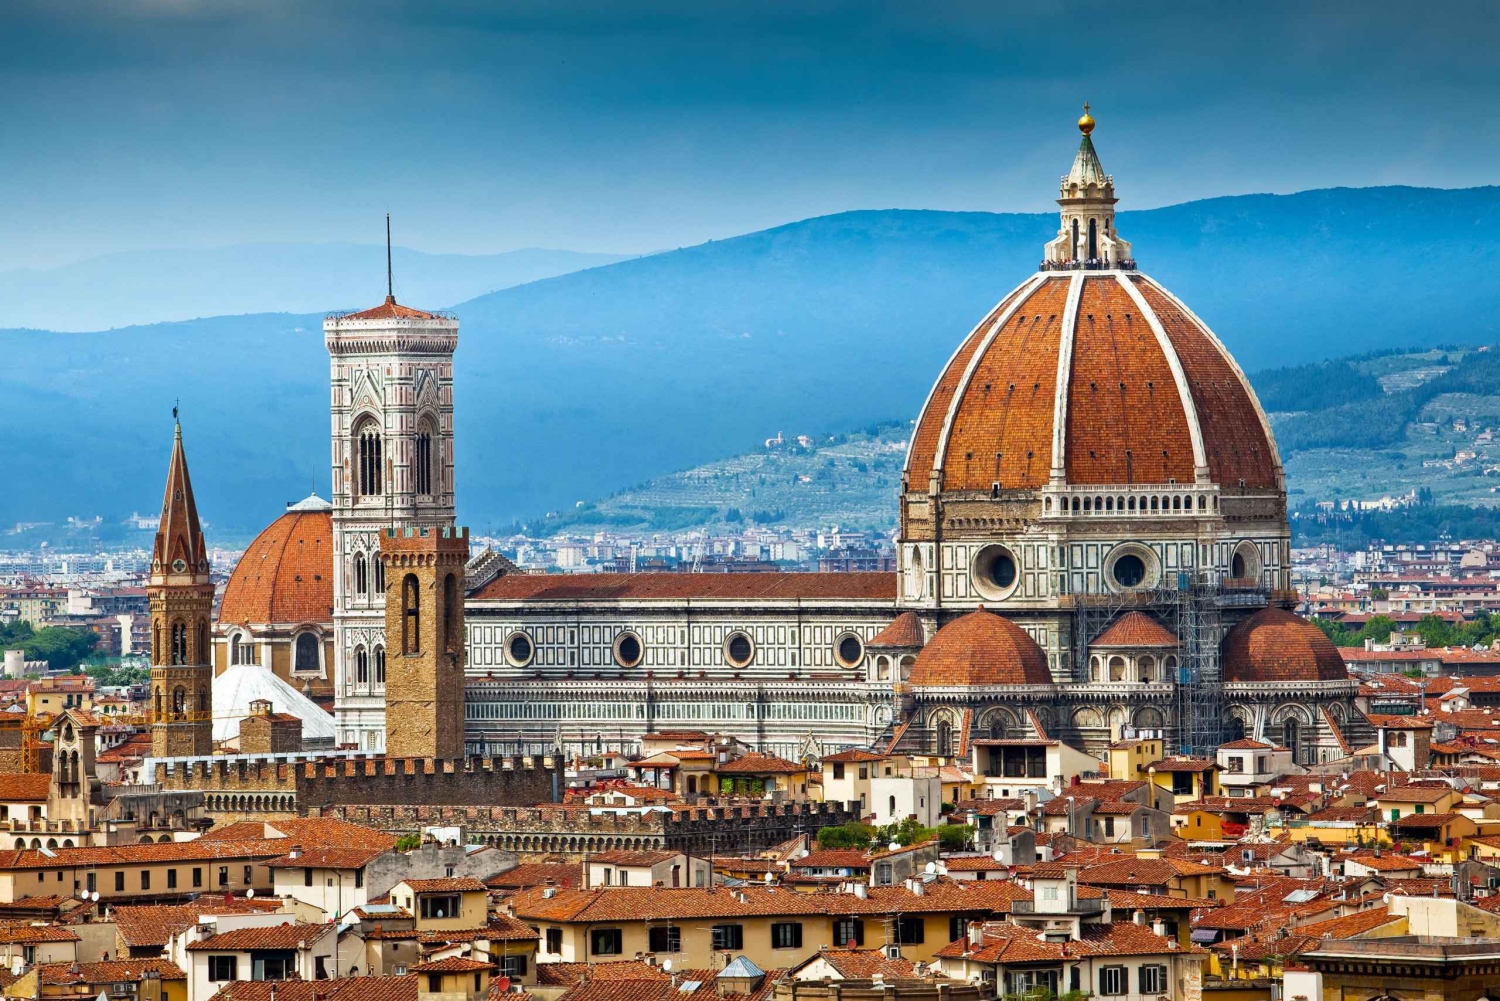 Florence: Capture the most Photogenic Spots with a Local